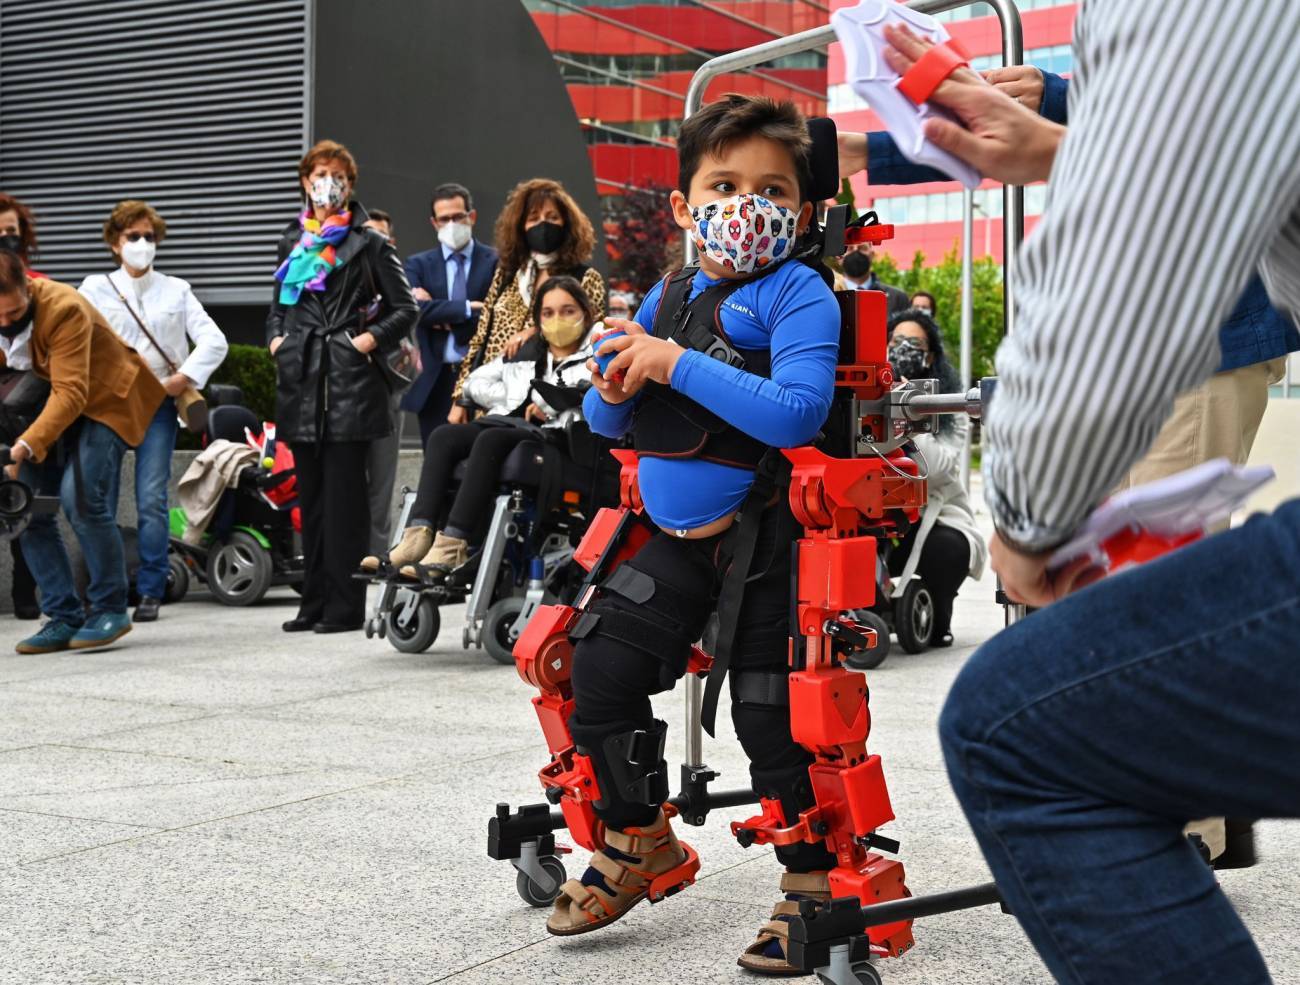 Demonstration of the exoskeleton with a child with spinal muscular atrophy